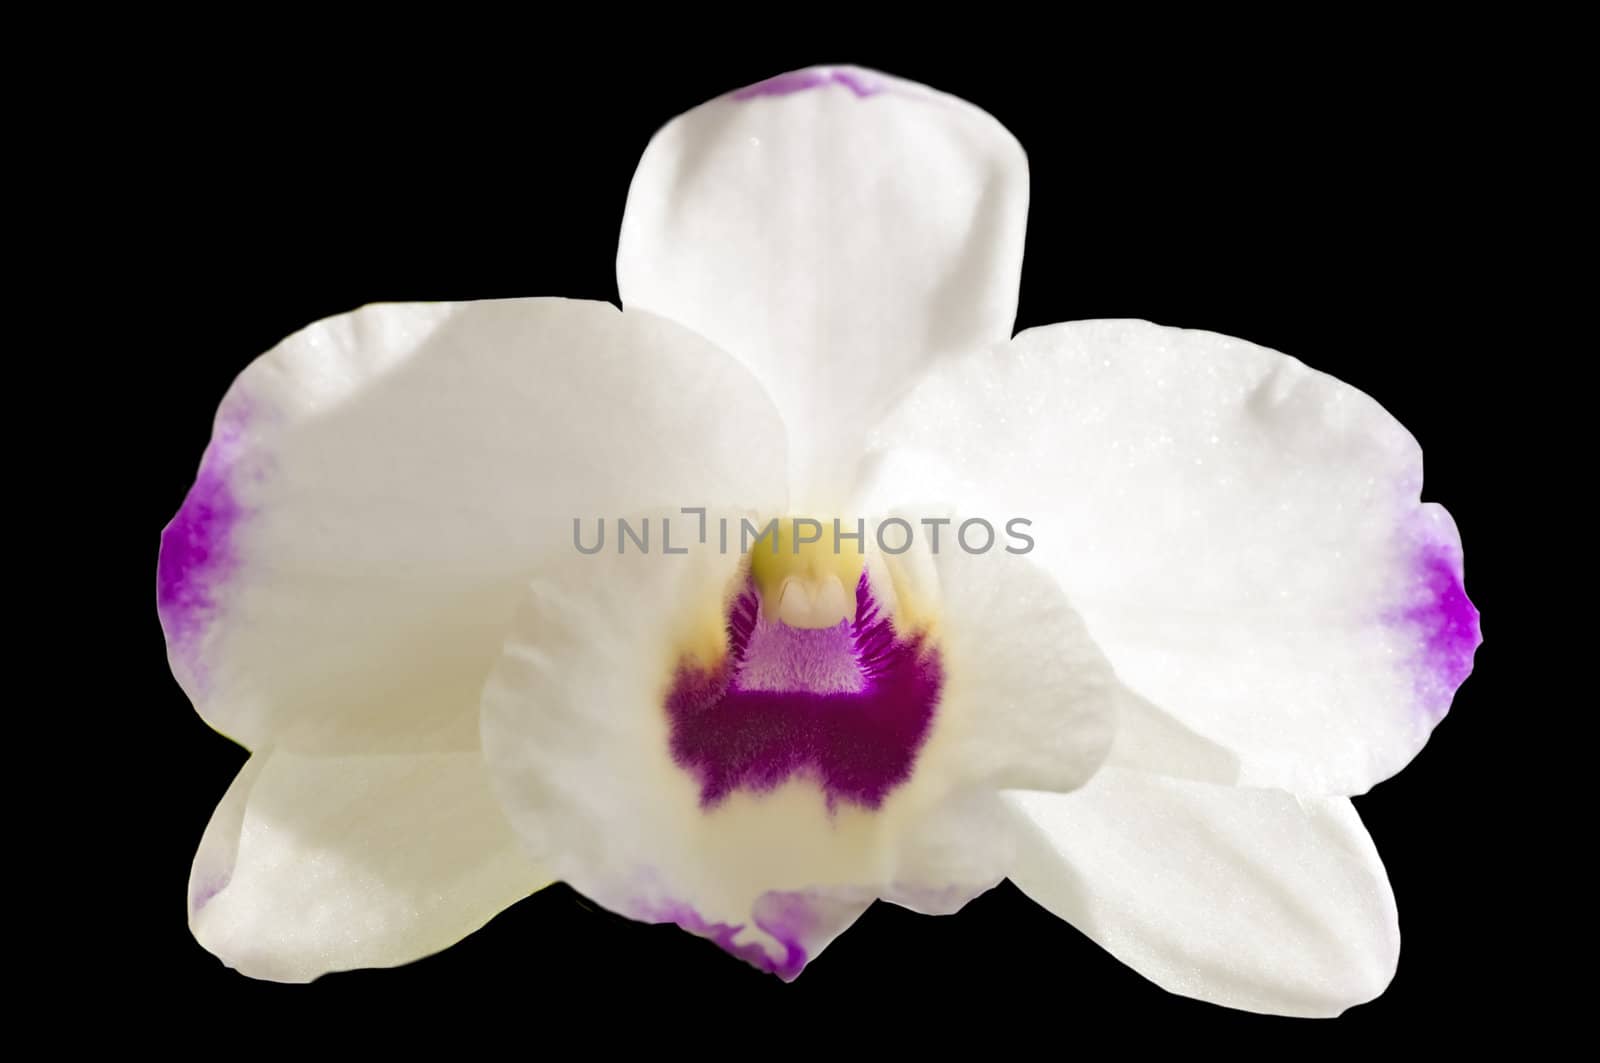 Dendrobium orchid by Jochen